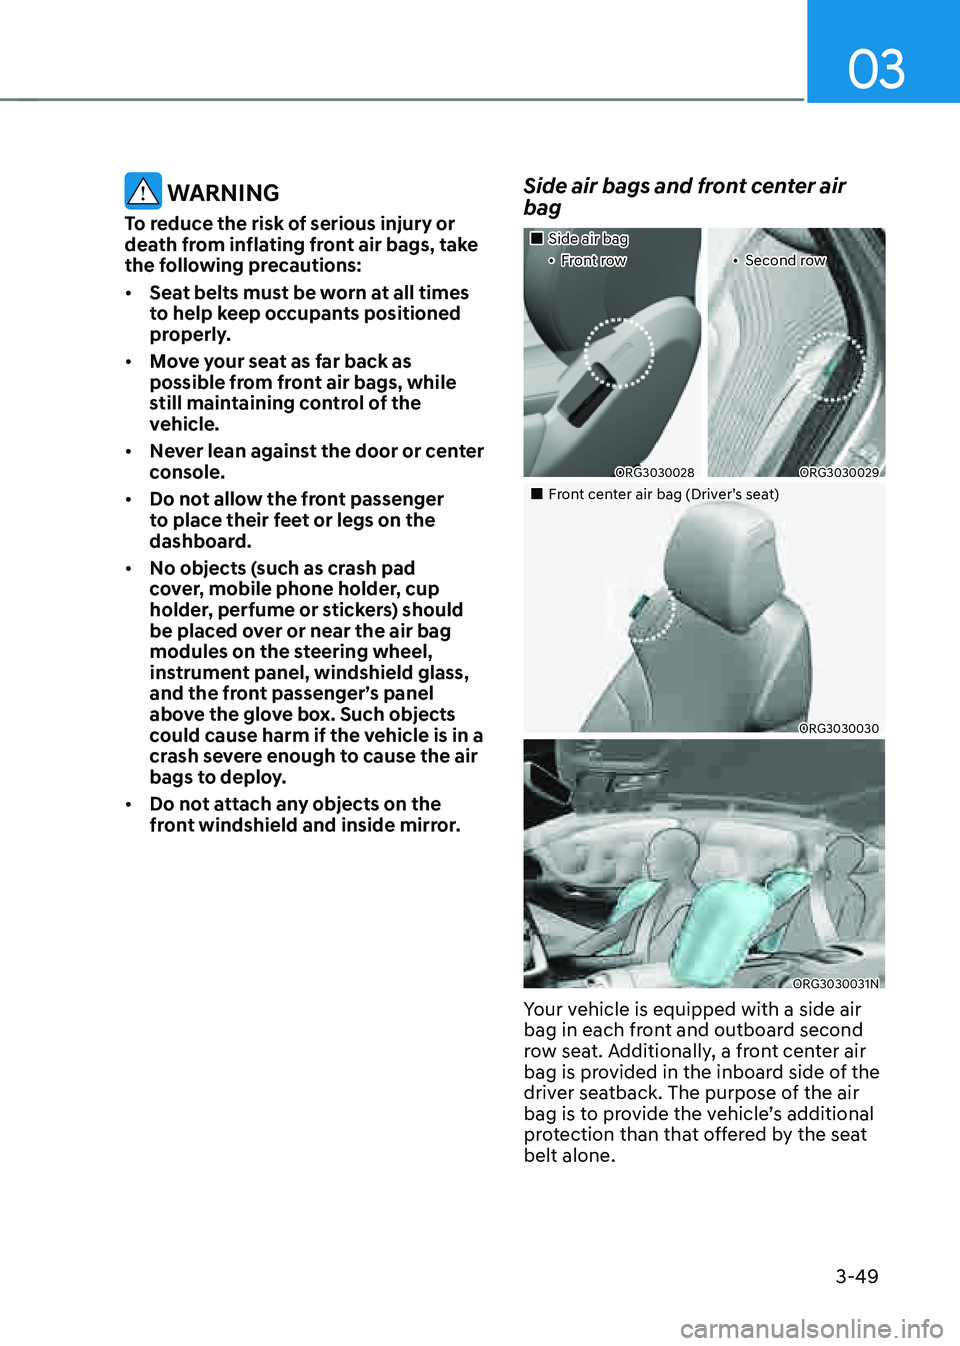 GENESIS G80 2021  Owners Manual 03
3-49
 WARNING
To reduce the risk of serious injury or 
death from inflating front air bags, take 
the following precautions:
• Seat belts must be worn at all times 
to help keep occupants positio